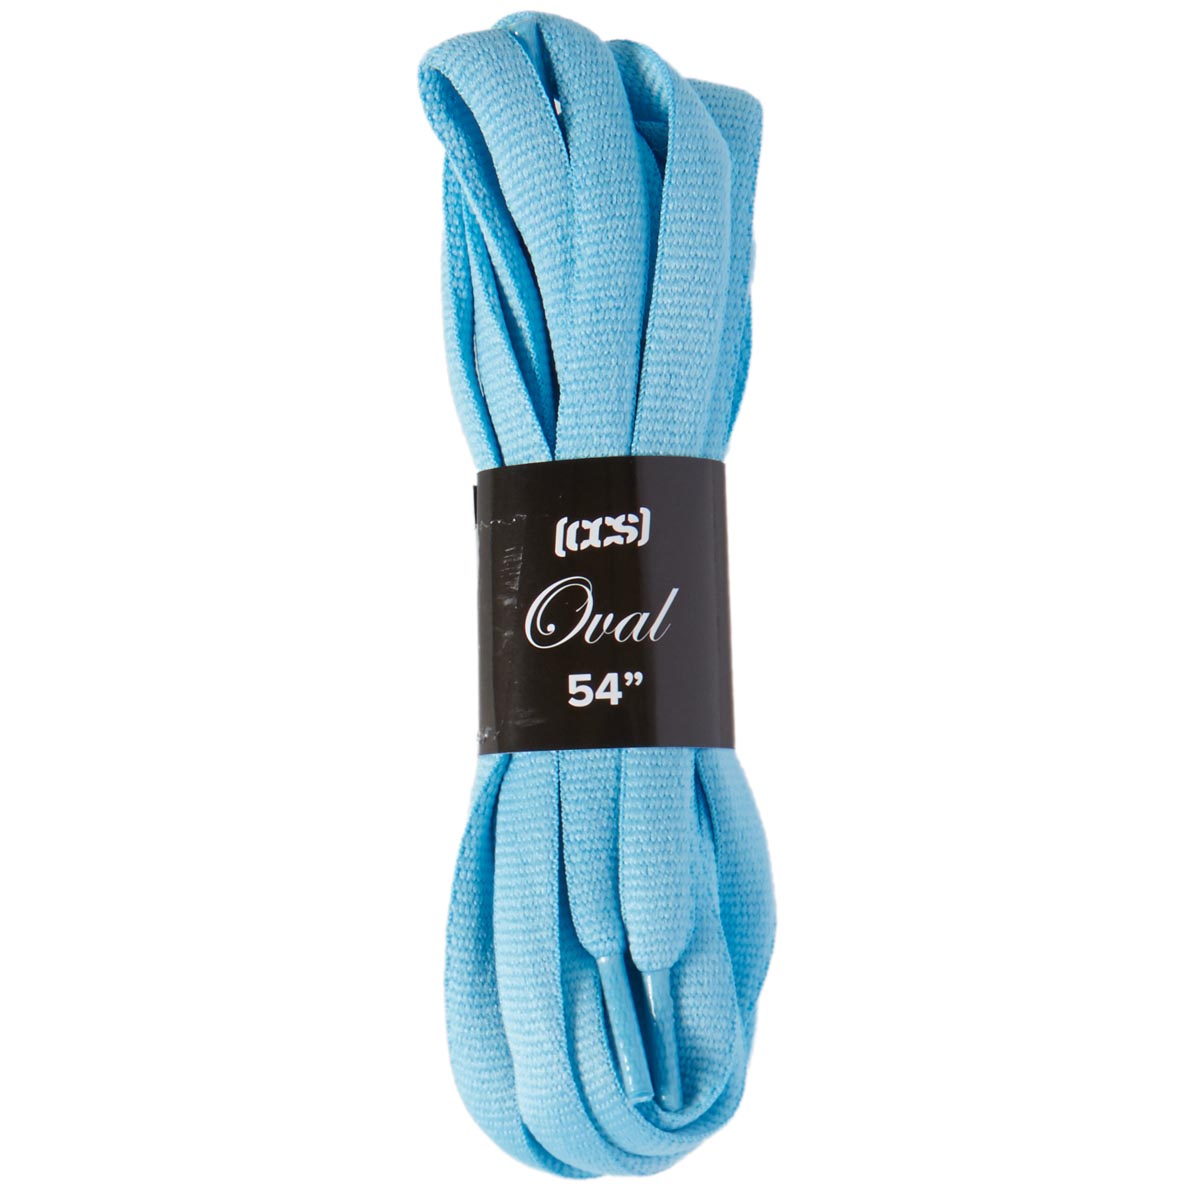 CCS Oval Shoelaces - Baby Blue image 1